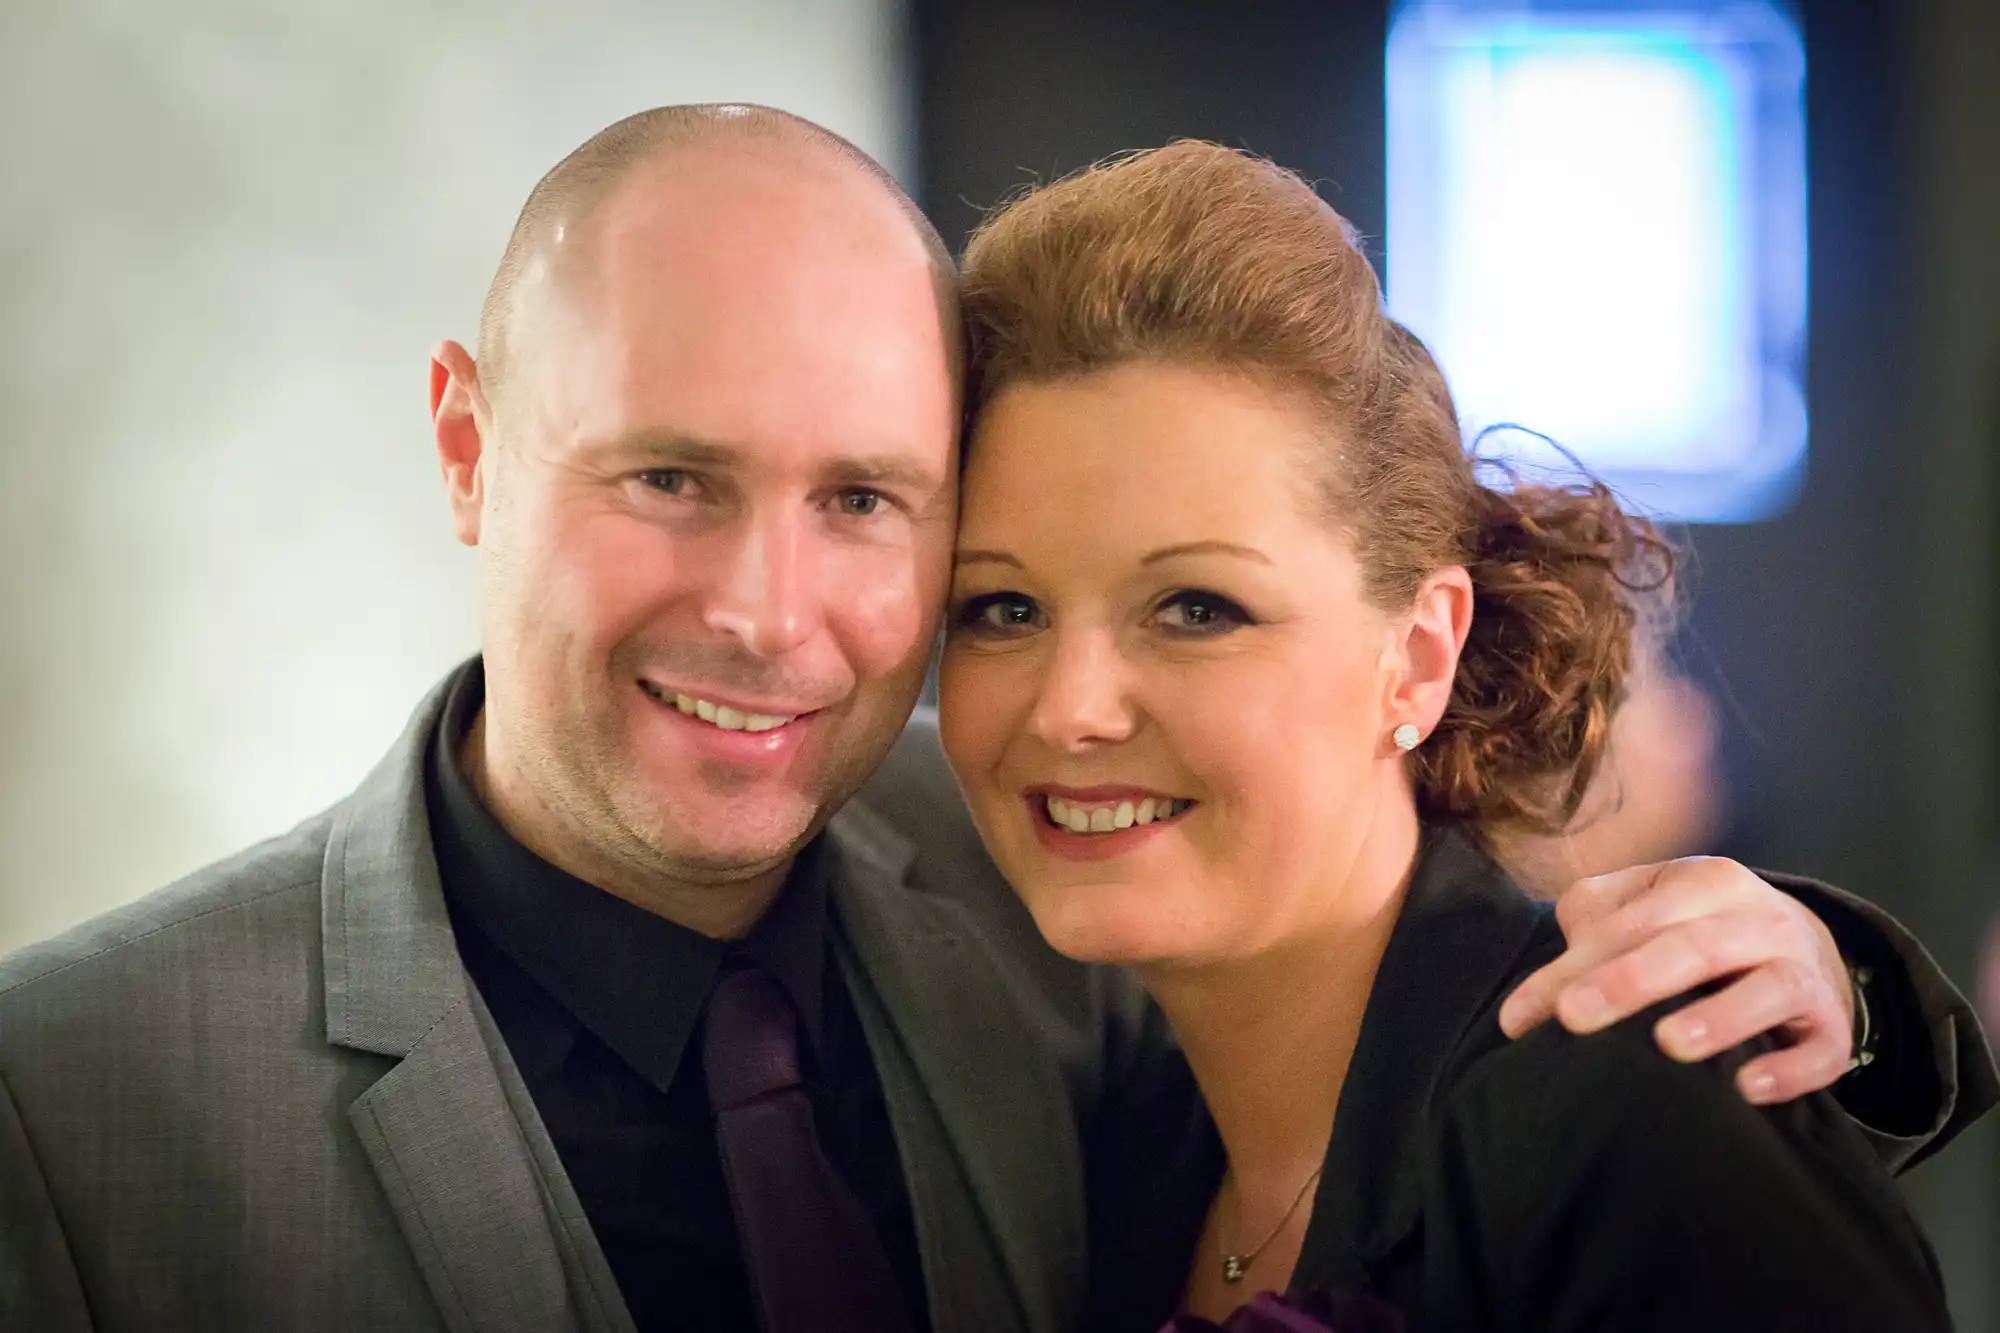 A smiling bald man and a woman with styled brown hair, both dressed in formal attire, posing closely for a photo in a softly lit indoor setting.